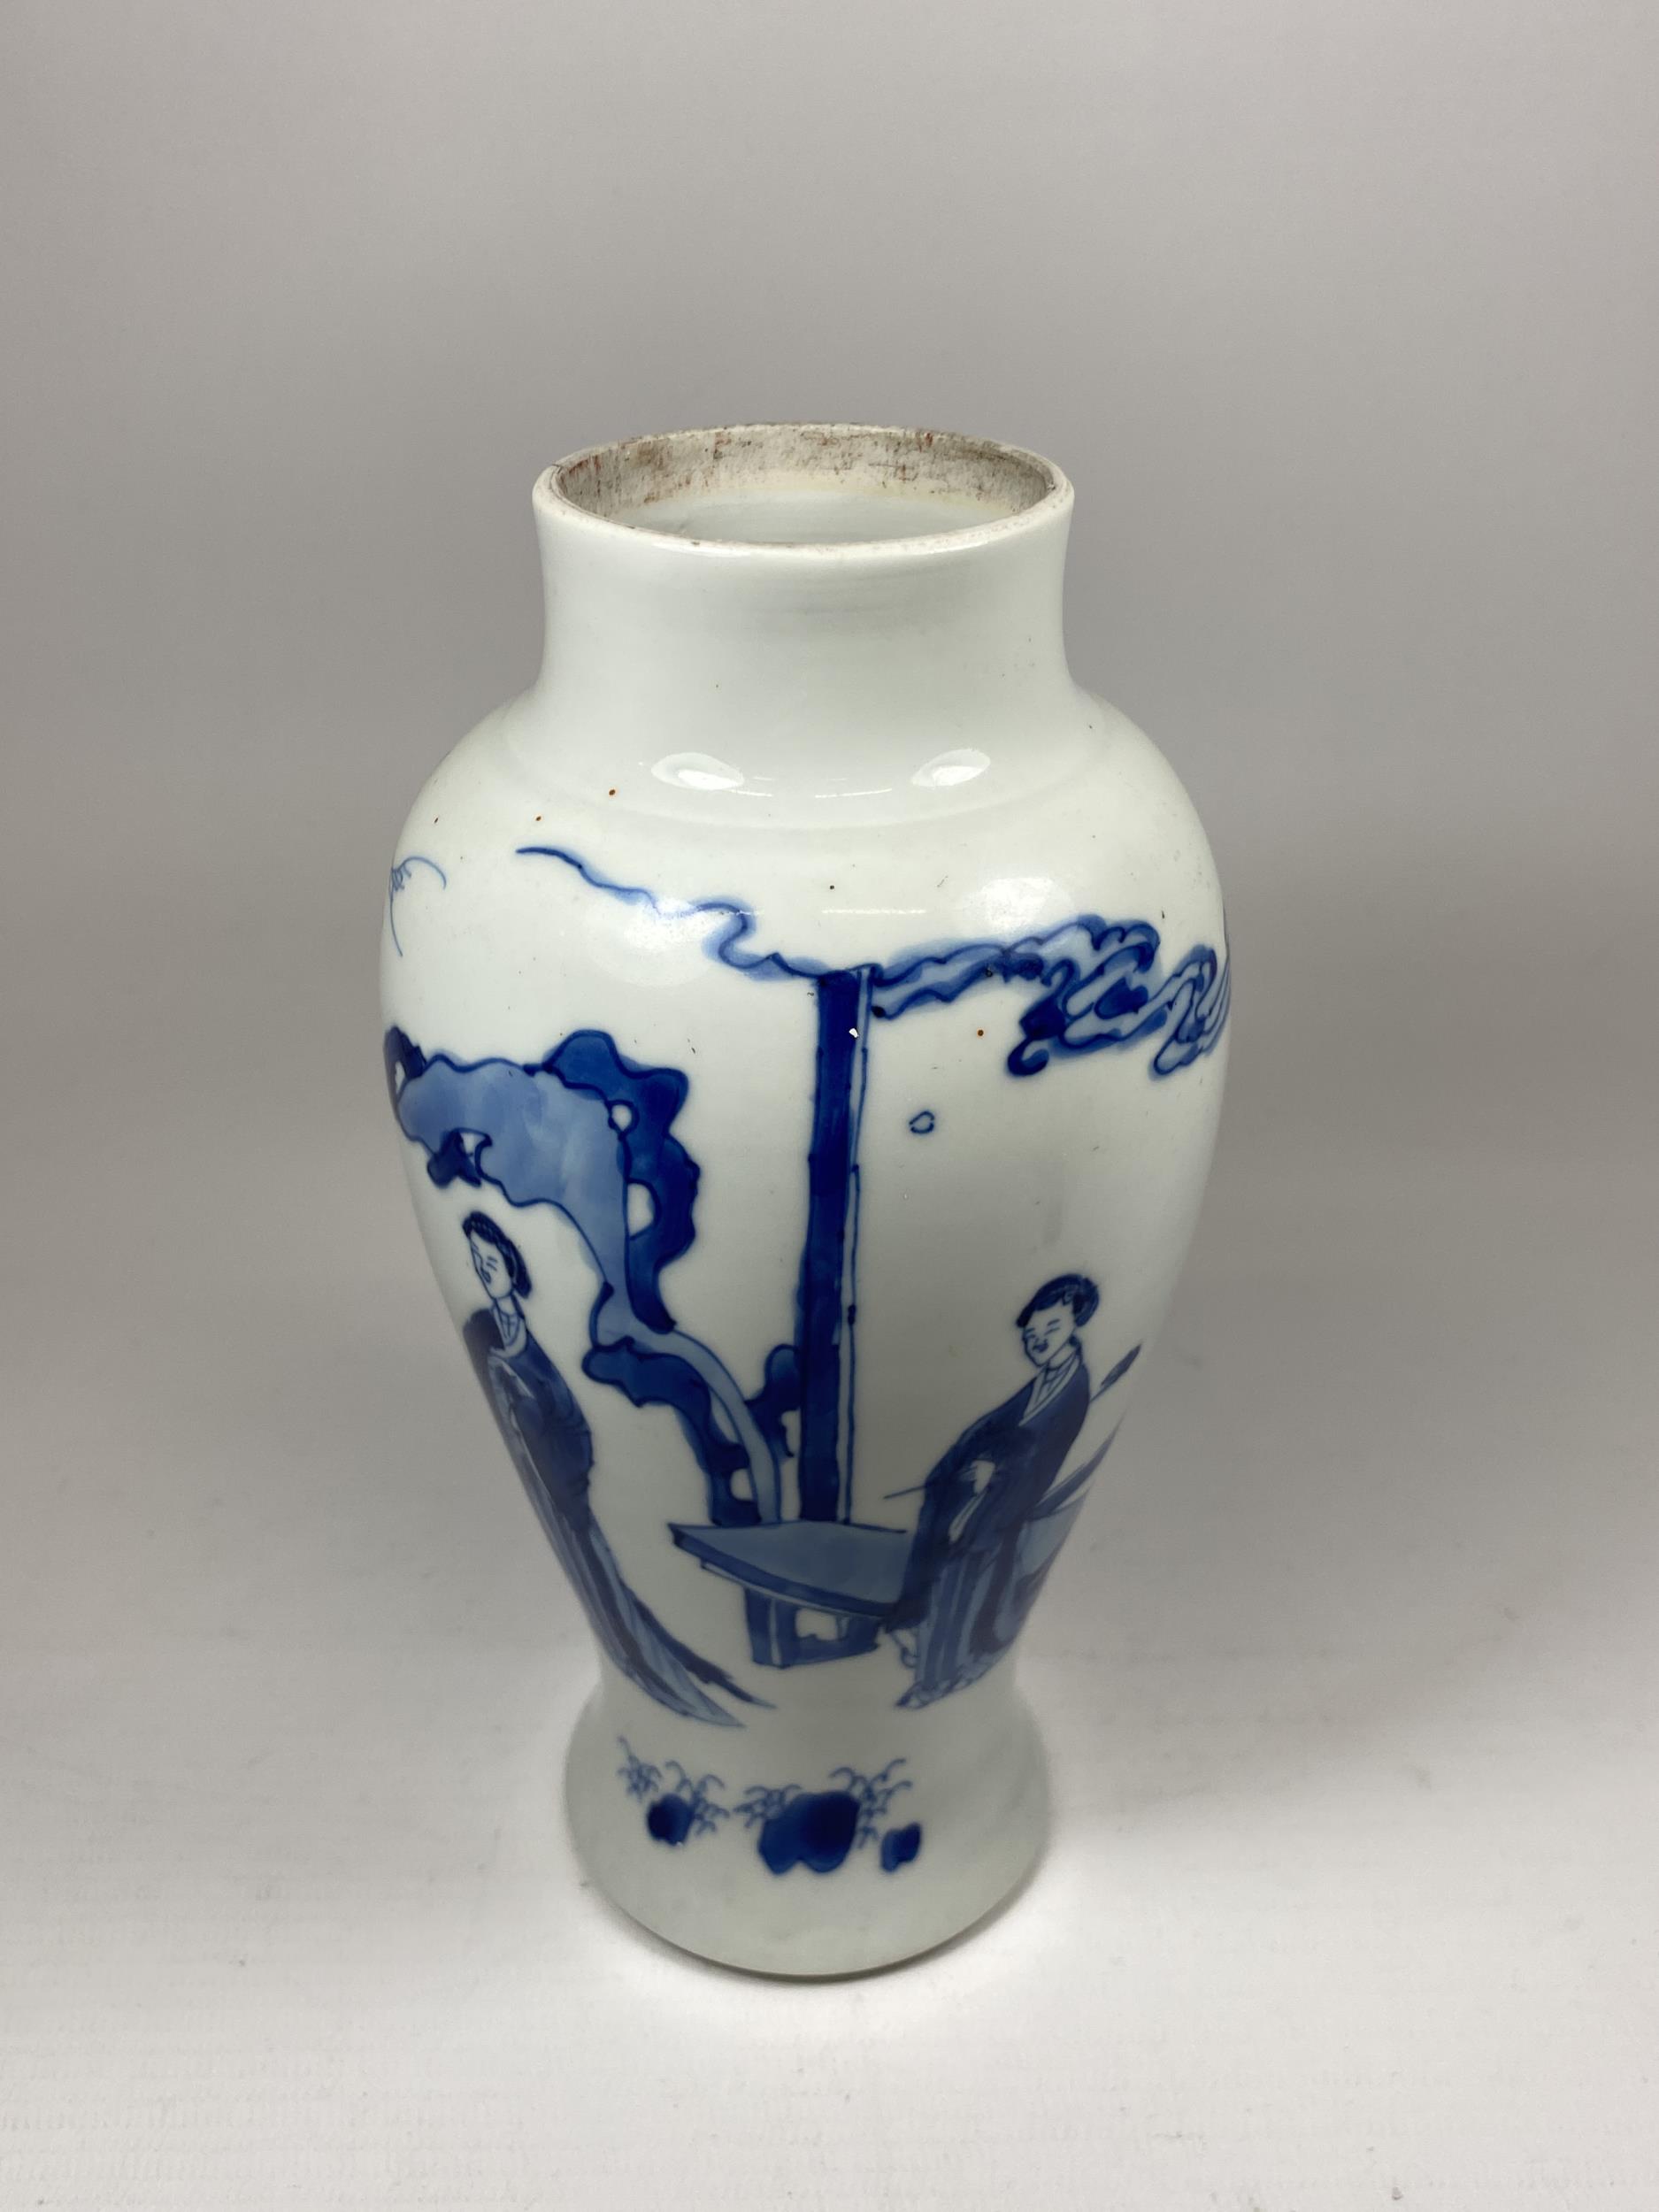 A CHINESE KANGXI PERIOD (1661-1722) BLUE AND WHITE PORCELAIN BALUSTER FORM VASE DEPICTING FIGURES IN - Image 2 of 7